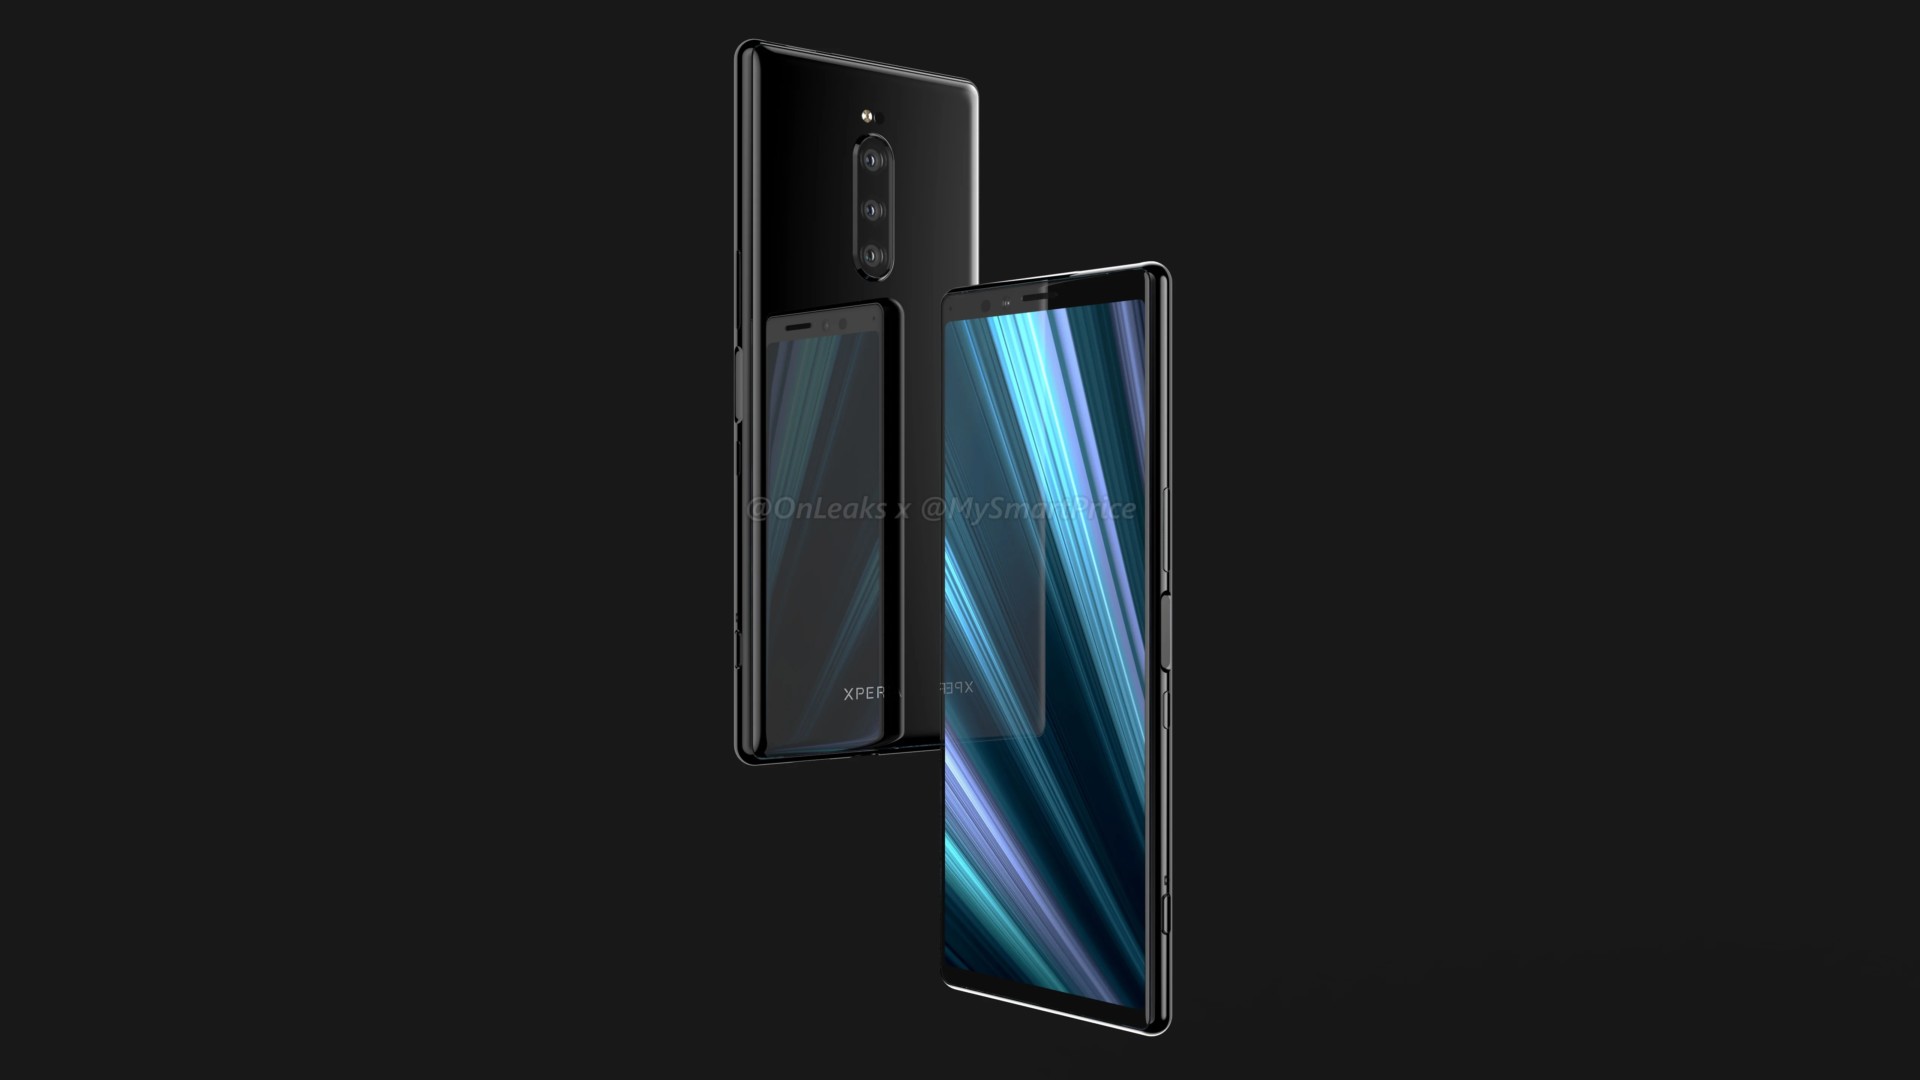 An unofficial render of the Sony Xperia XZ4.